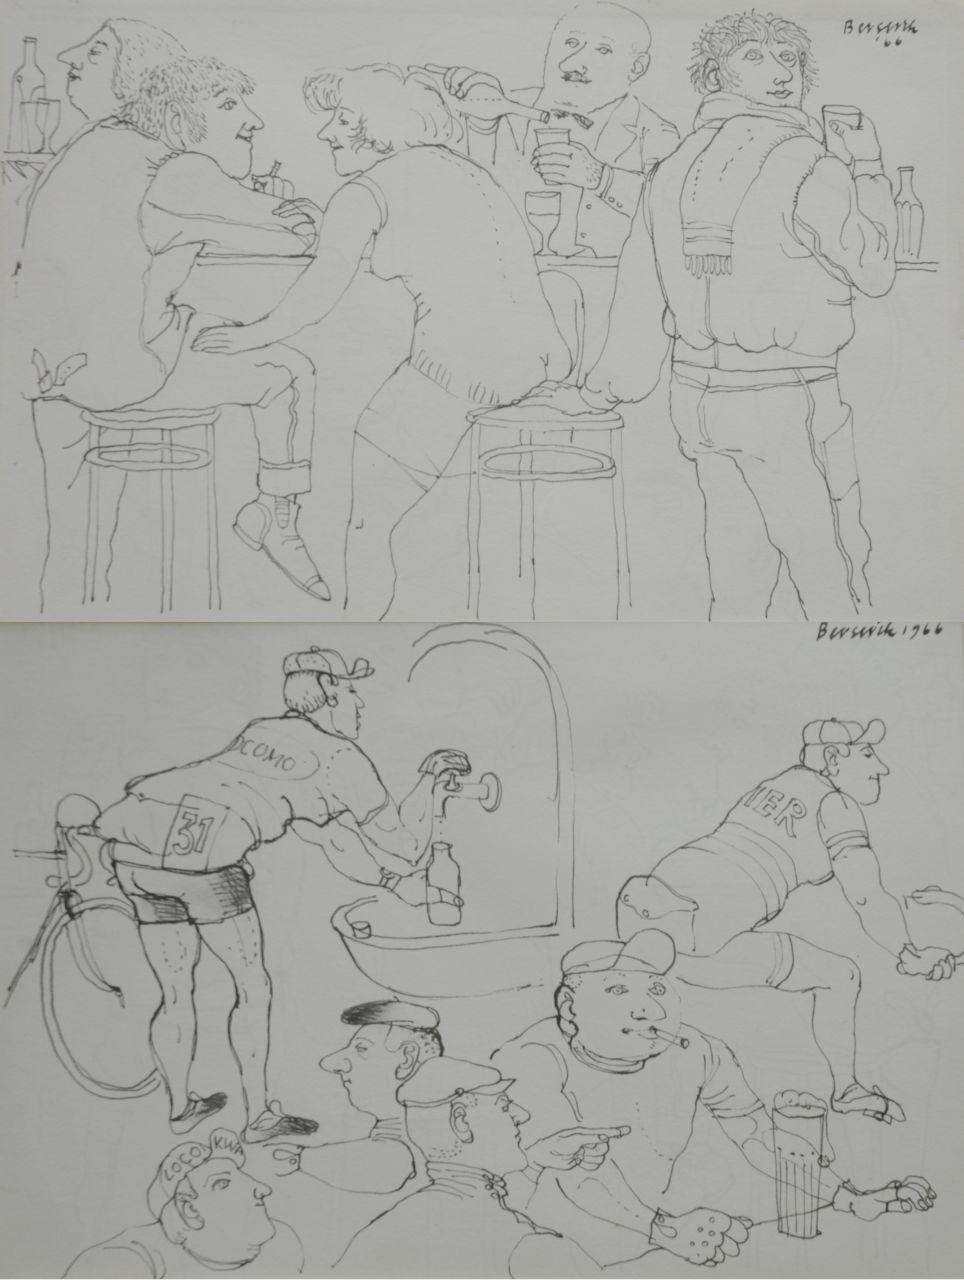 Berserik H.  | Hermanus 'Herman' Berserik | Watercolours and drawings offered for sale | At the bar; on the reverse: Bikers at the bar, pen and ink on paper 15.8 x 23.7 cm, signed u.r. and both dated 1966